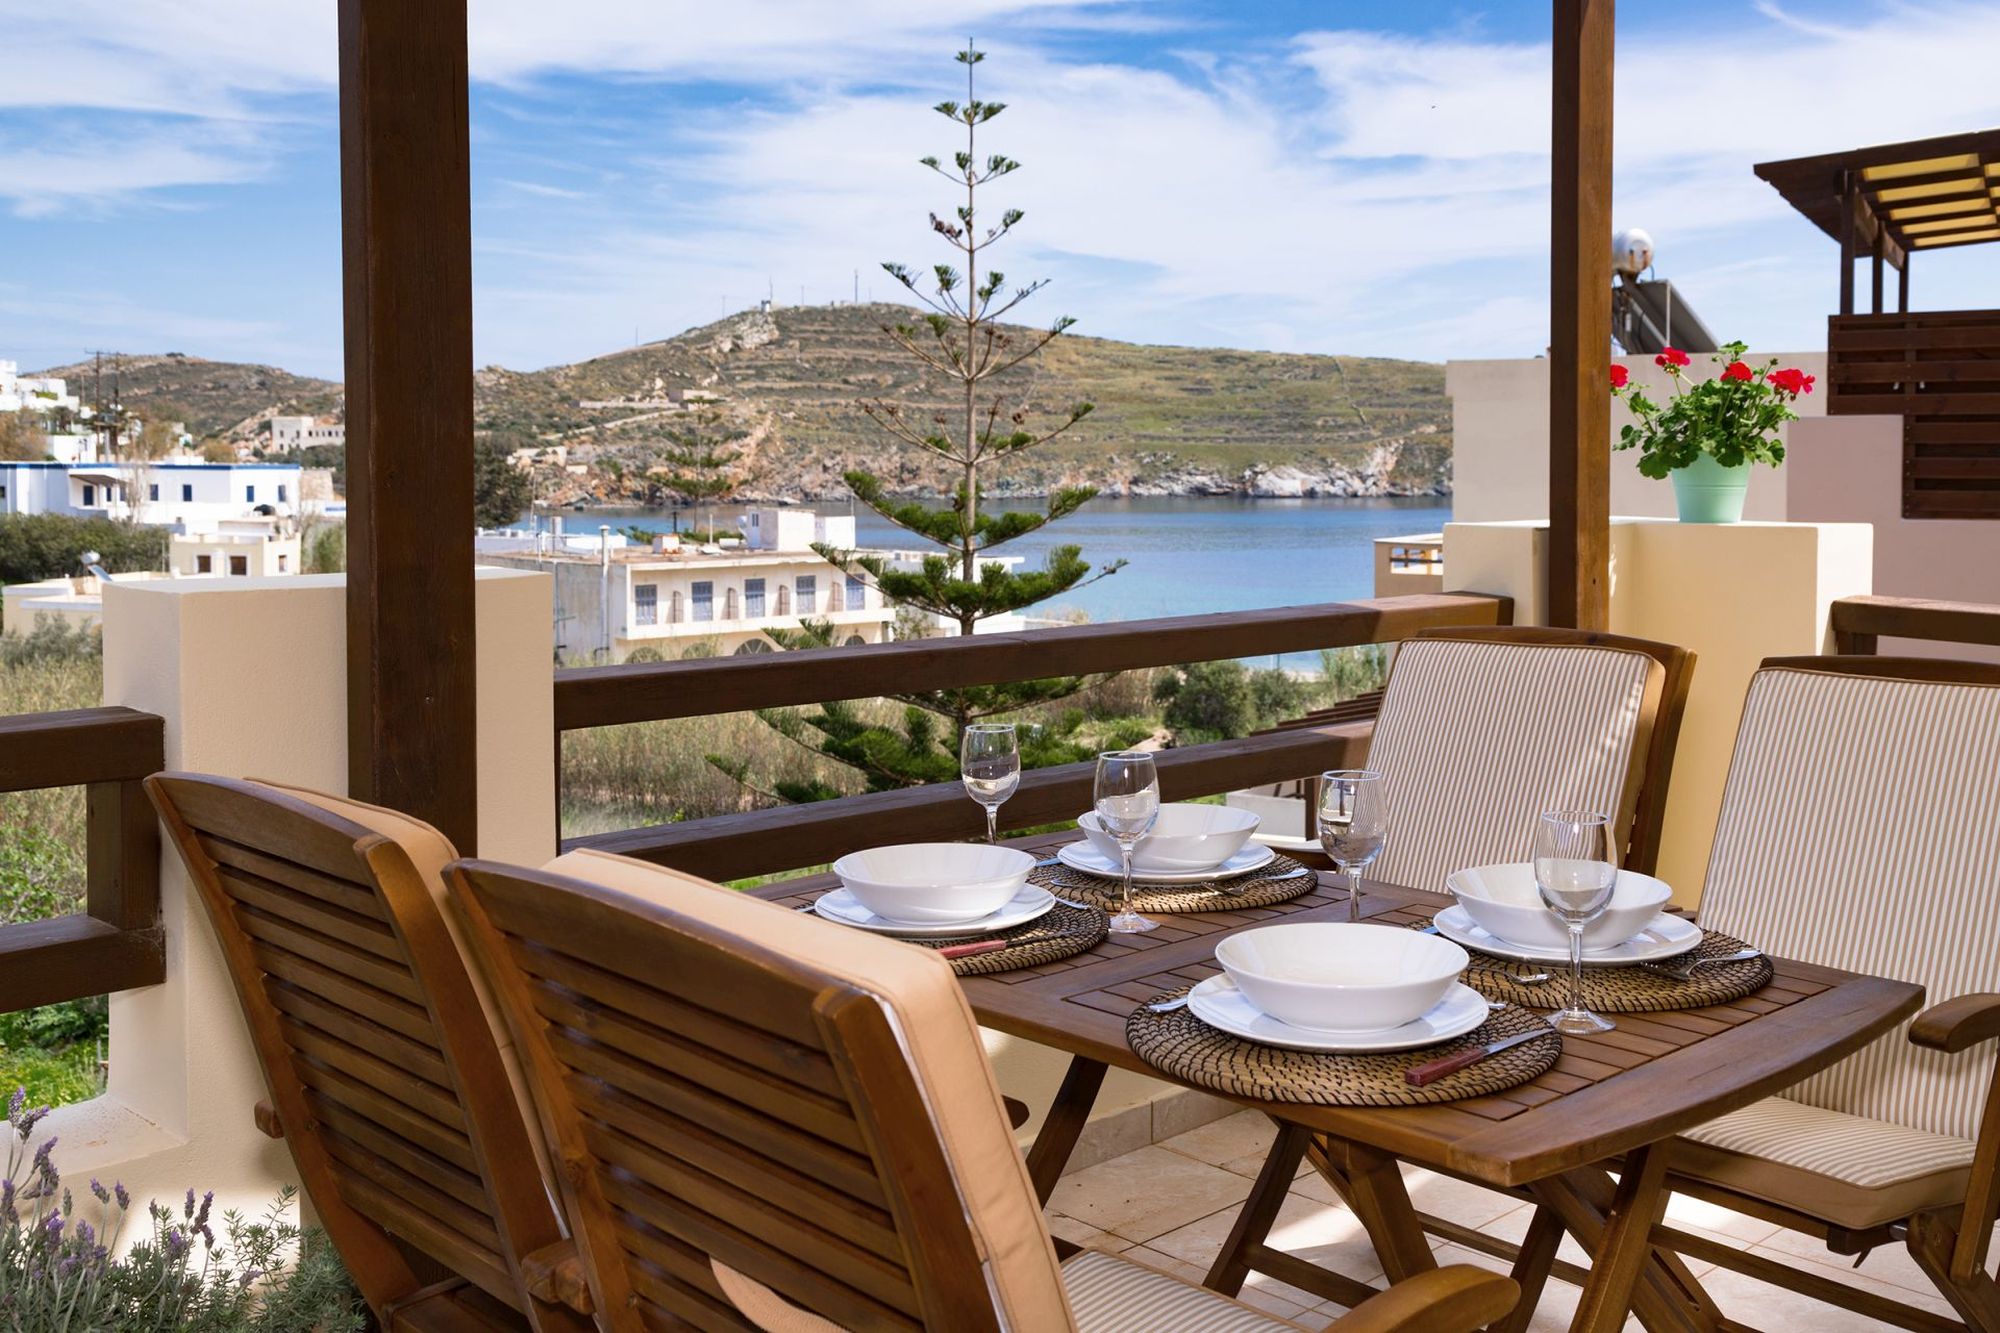 Sea view veranda with a dining table for four persons with white dinnerware on it.